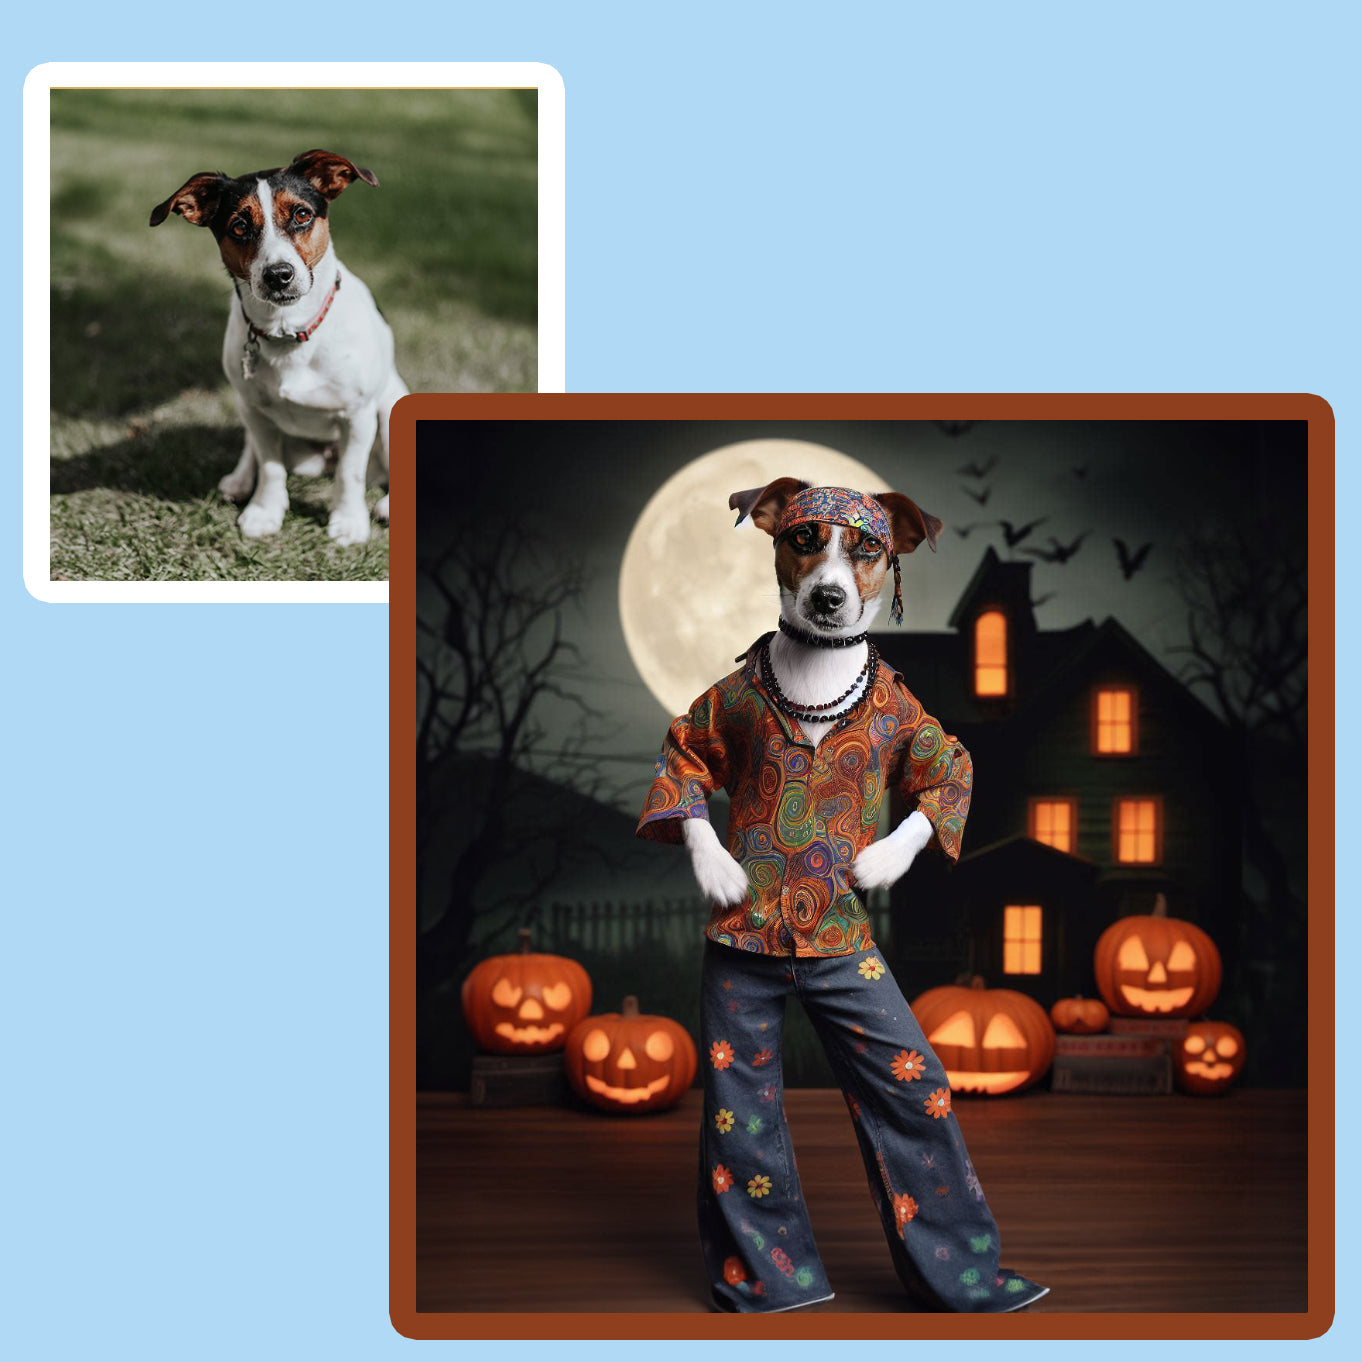 A reto pet portrait 1960s a jacket russell dog standing like a human in front of a halloween house and full moon